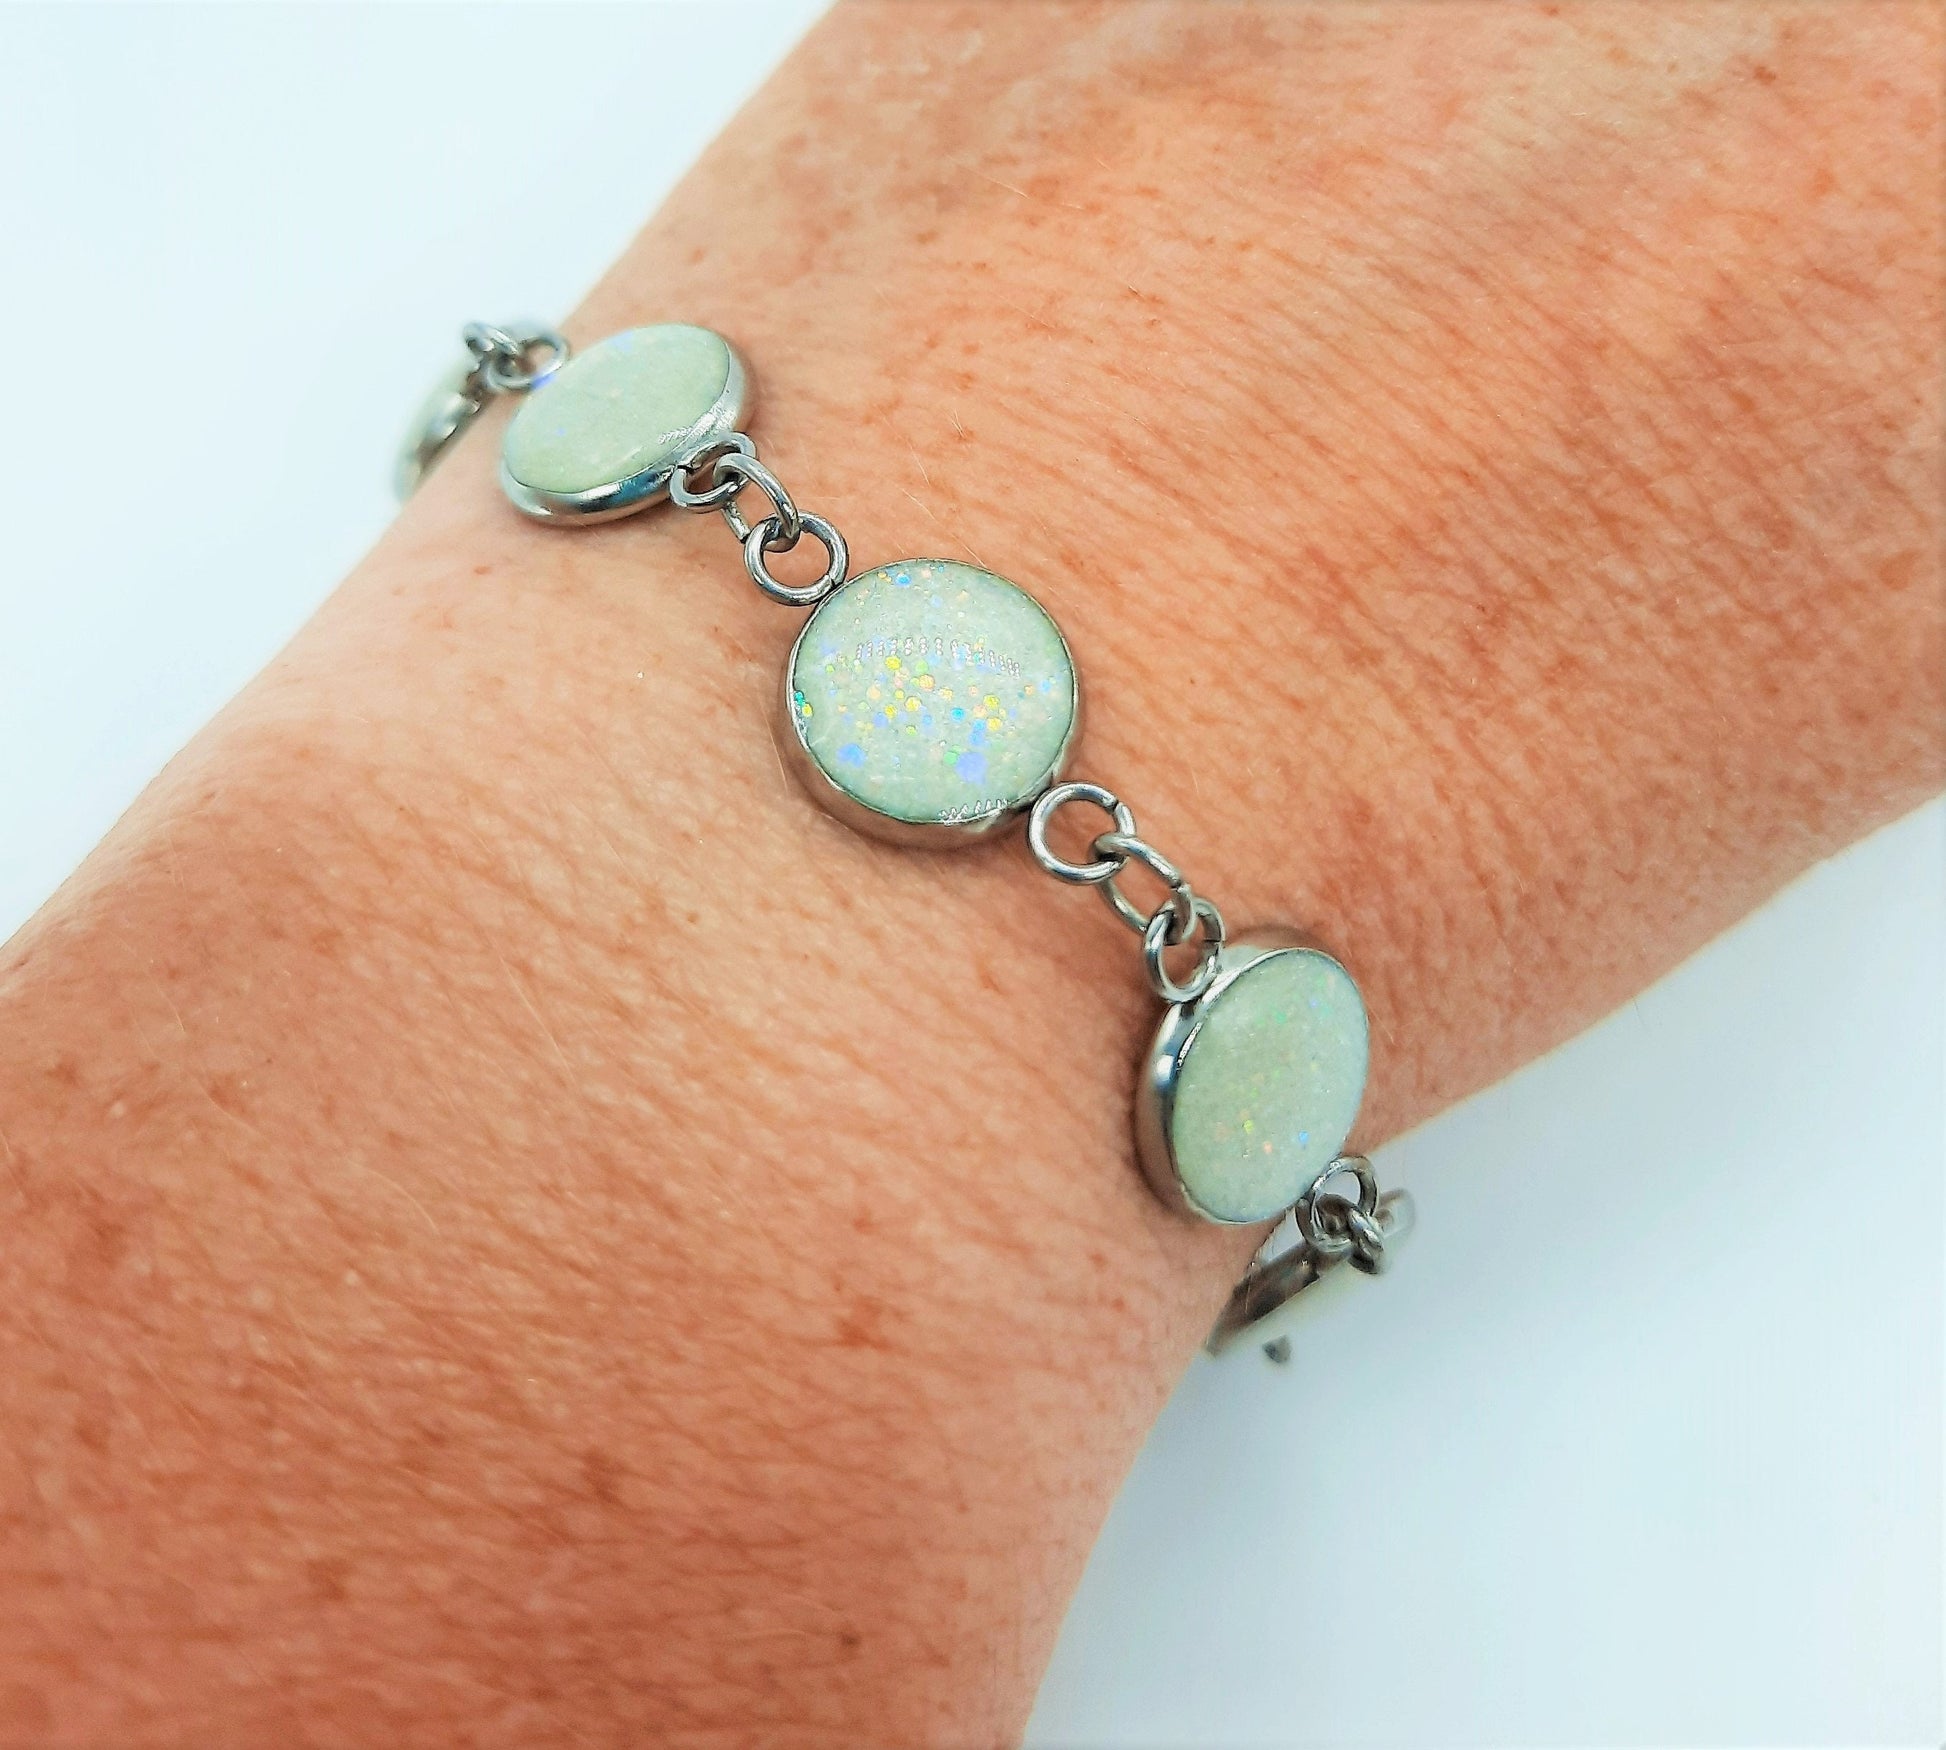 Handcrafted / Handmade Opal (like) Sparkle Resin Link Bracelet - Made with Resin, Mica, Iridescent Glitter, & Holographic Powder